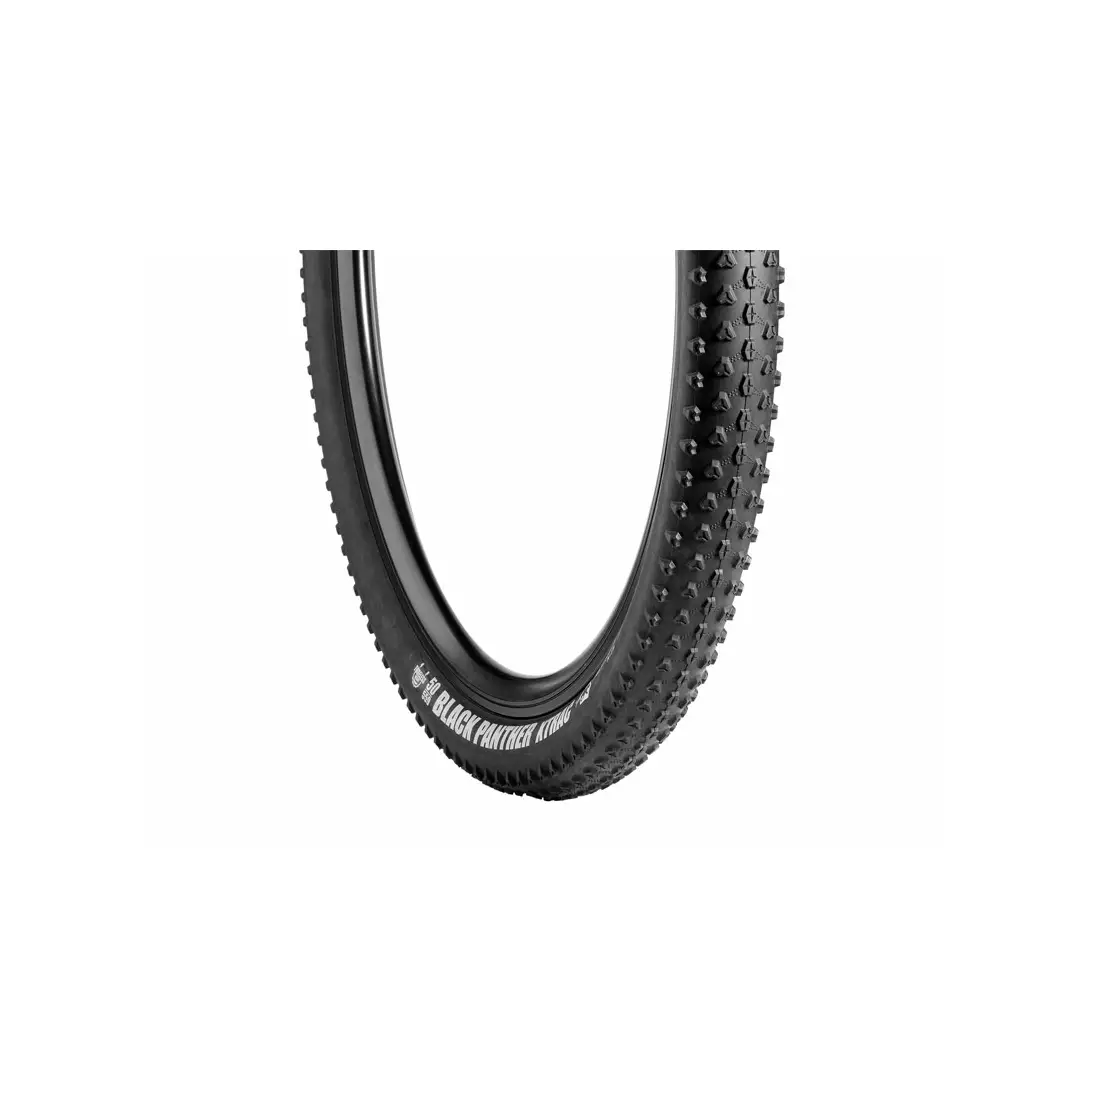 VREDESTEIN BLACK PANTHER mtb bicycle tyre 27,5x2.20 (55-584) TUBELESS READY TPI120 615g black VRD-27305